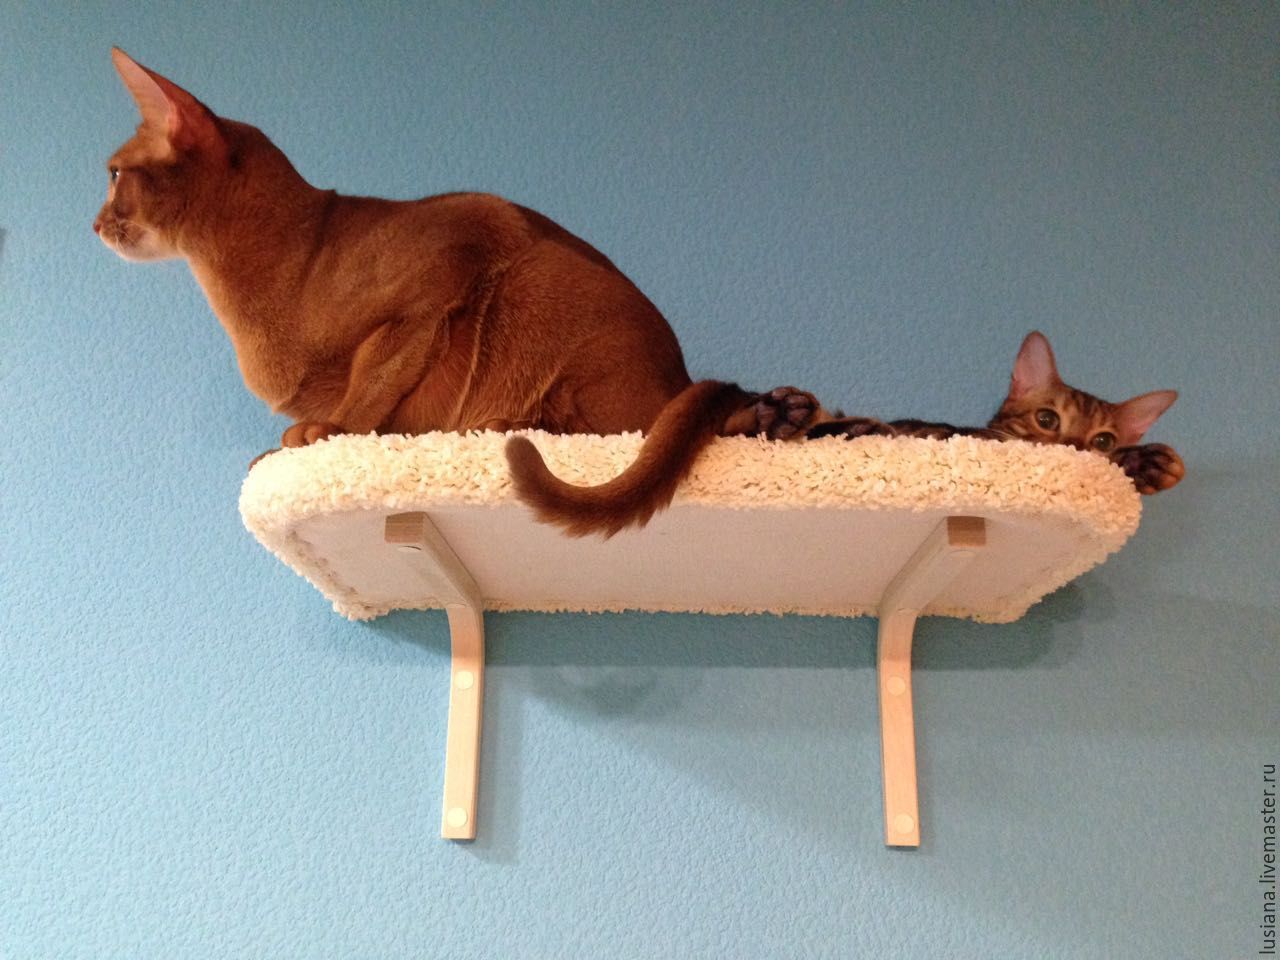 Wall shelves for cats buy. Available in 